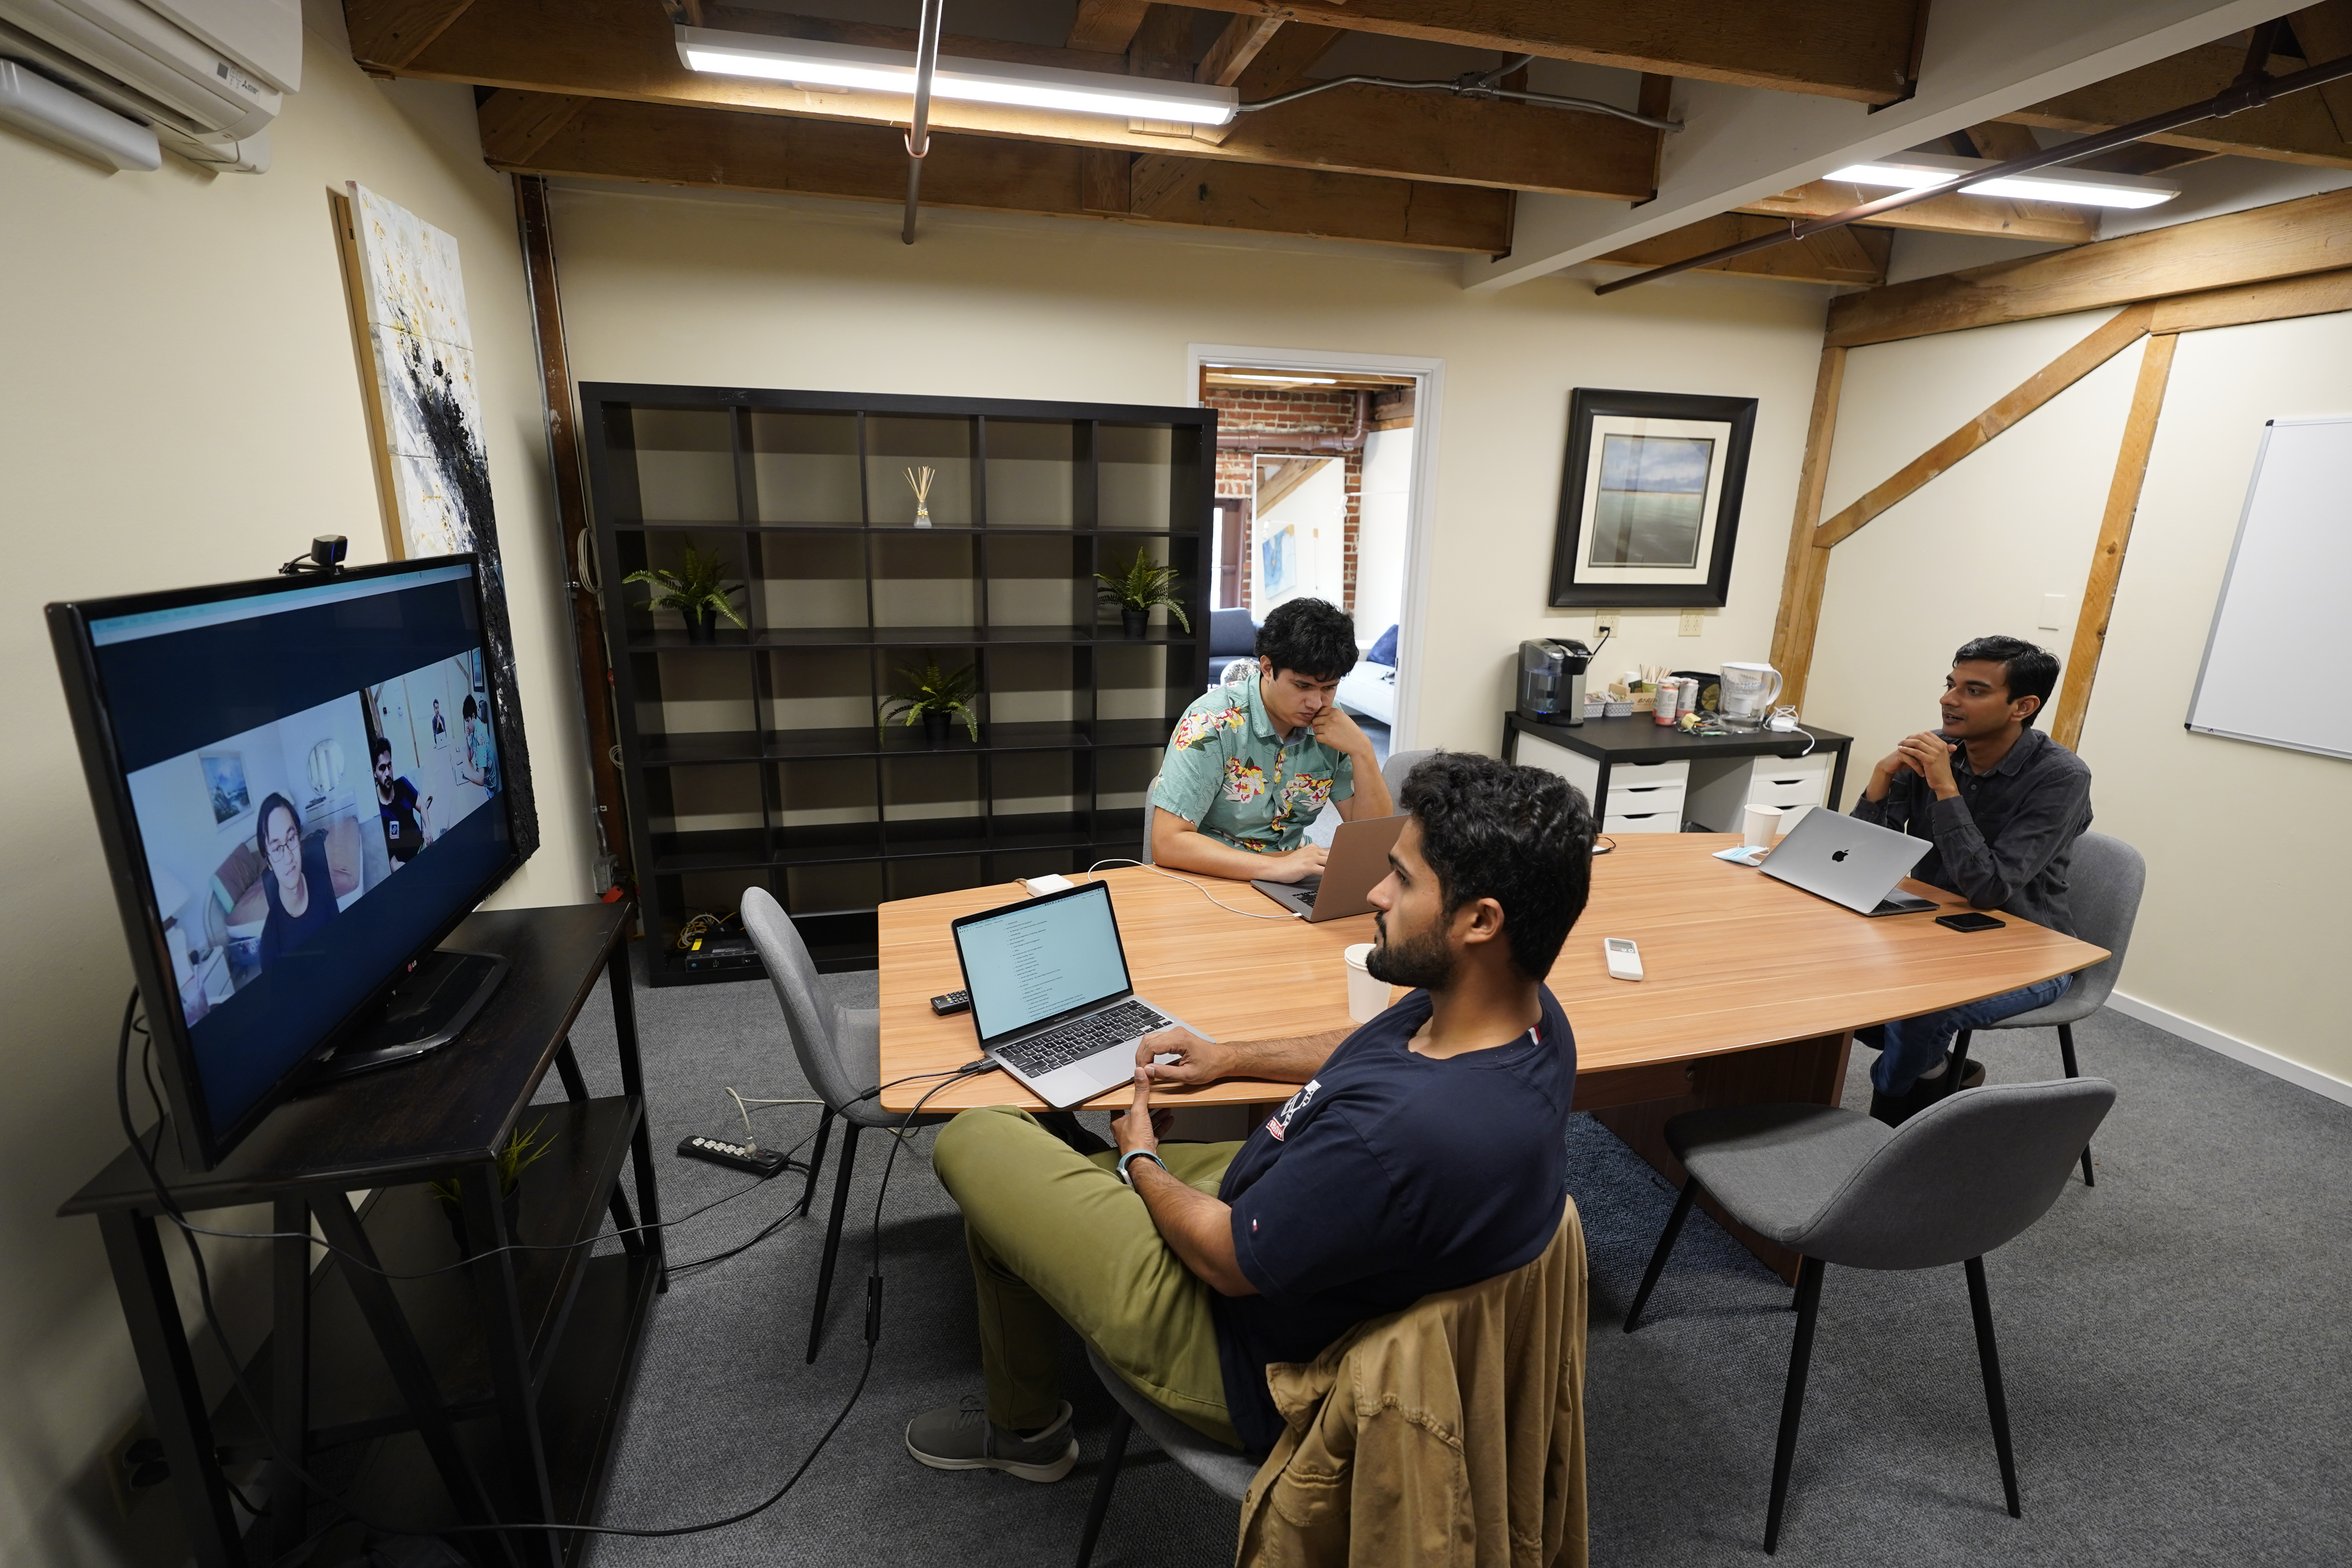 RunX CEO Ankur Dahiya (center) takes part in a video meeting with employees JD Palomino (left) and Nitin Aggarwal (right) at a rented office in San Francisco. Technology companies like RunX now face the challenge of how, when and even whether they should bring their long-isolated employees back to offices.